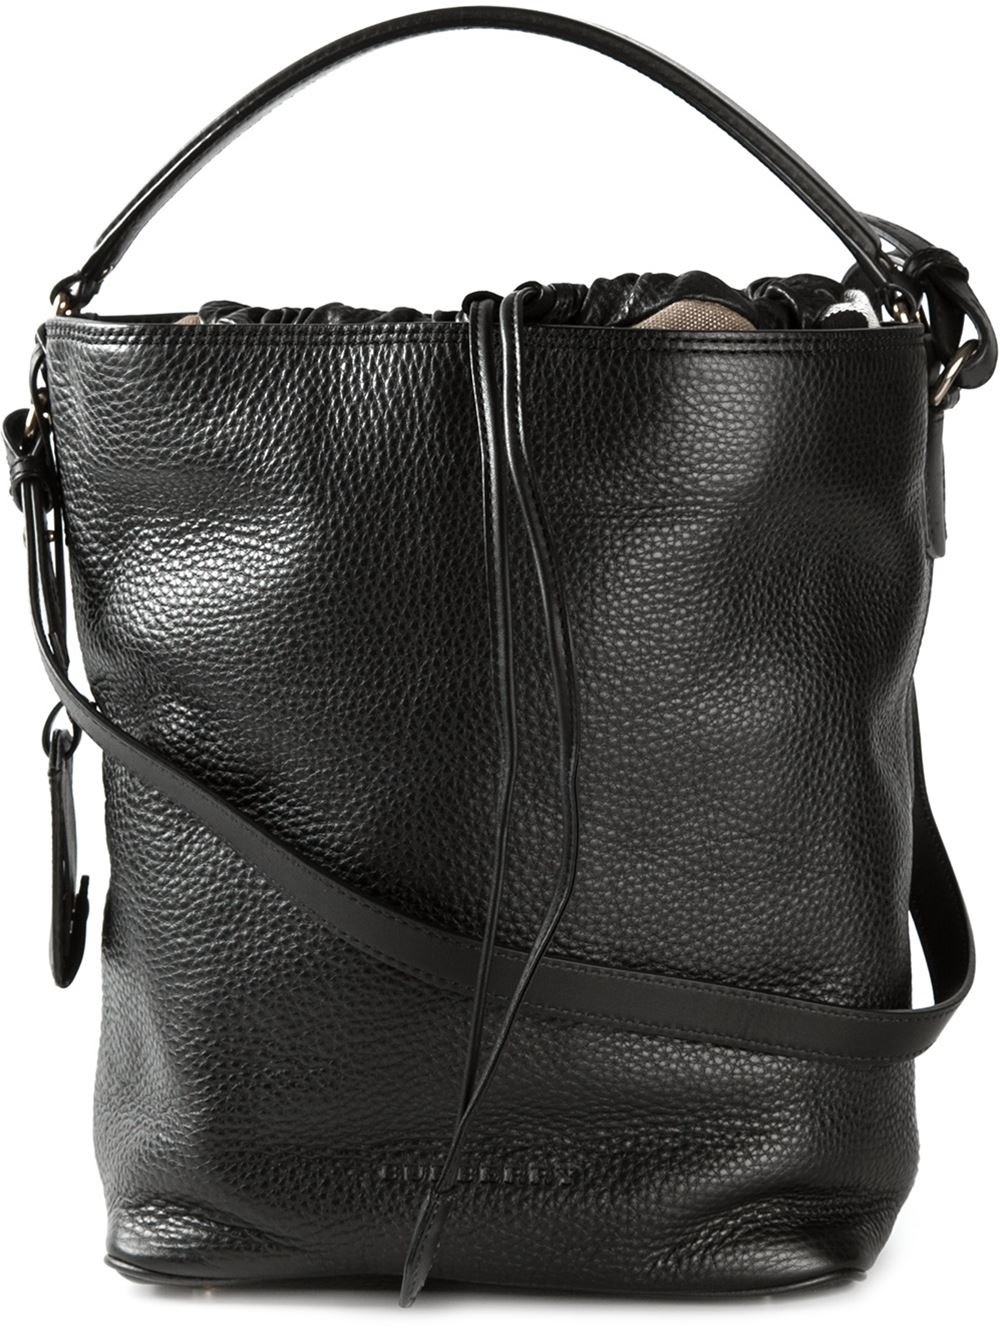 Burberry The Bucket Calf-Leather Shoulder Bag in Black | Lyst